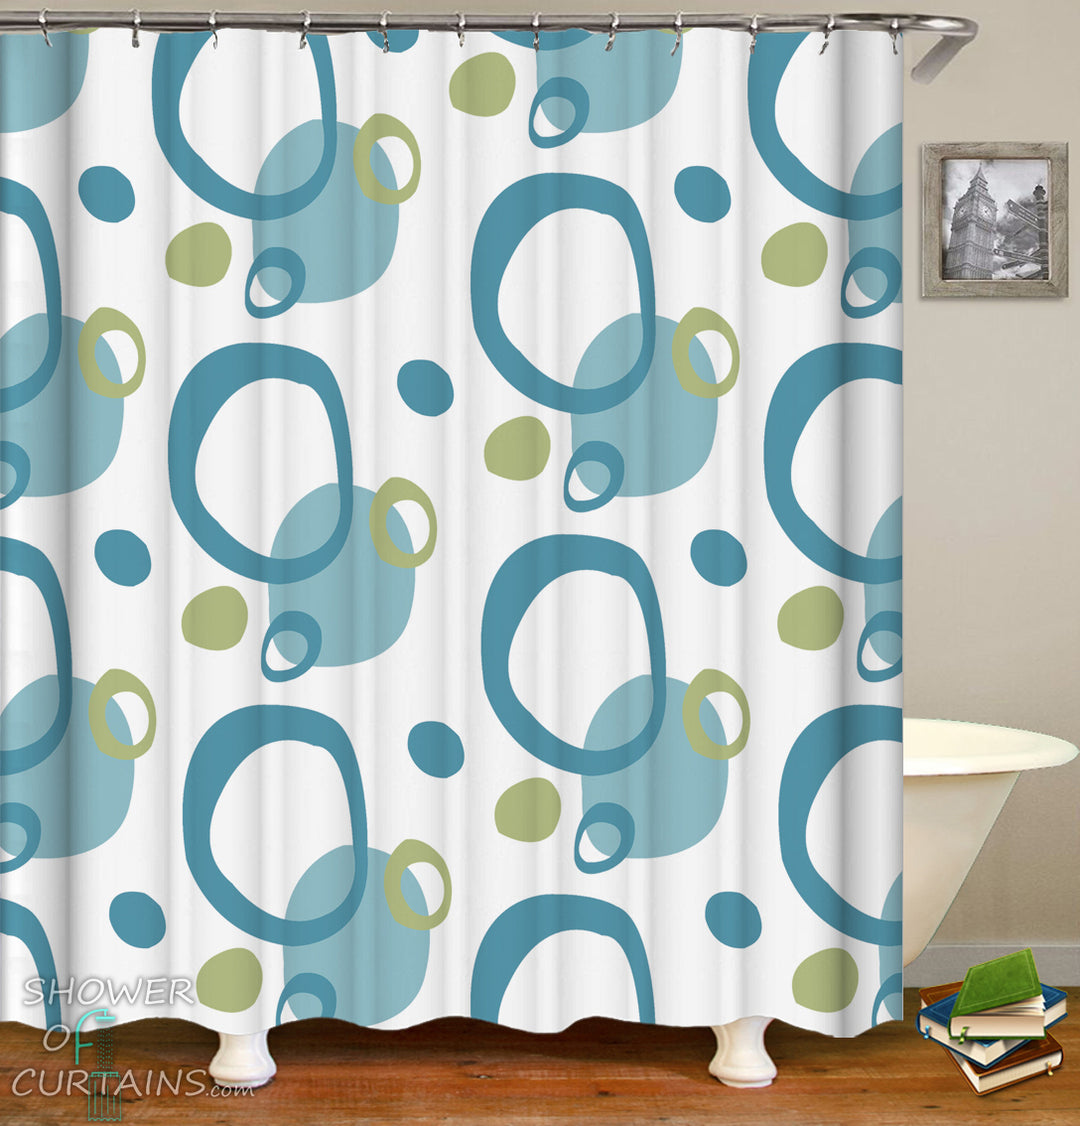 Classic Shower Curtain of Green And Teal Rings